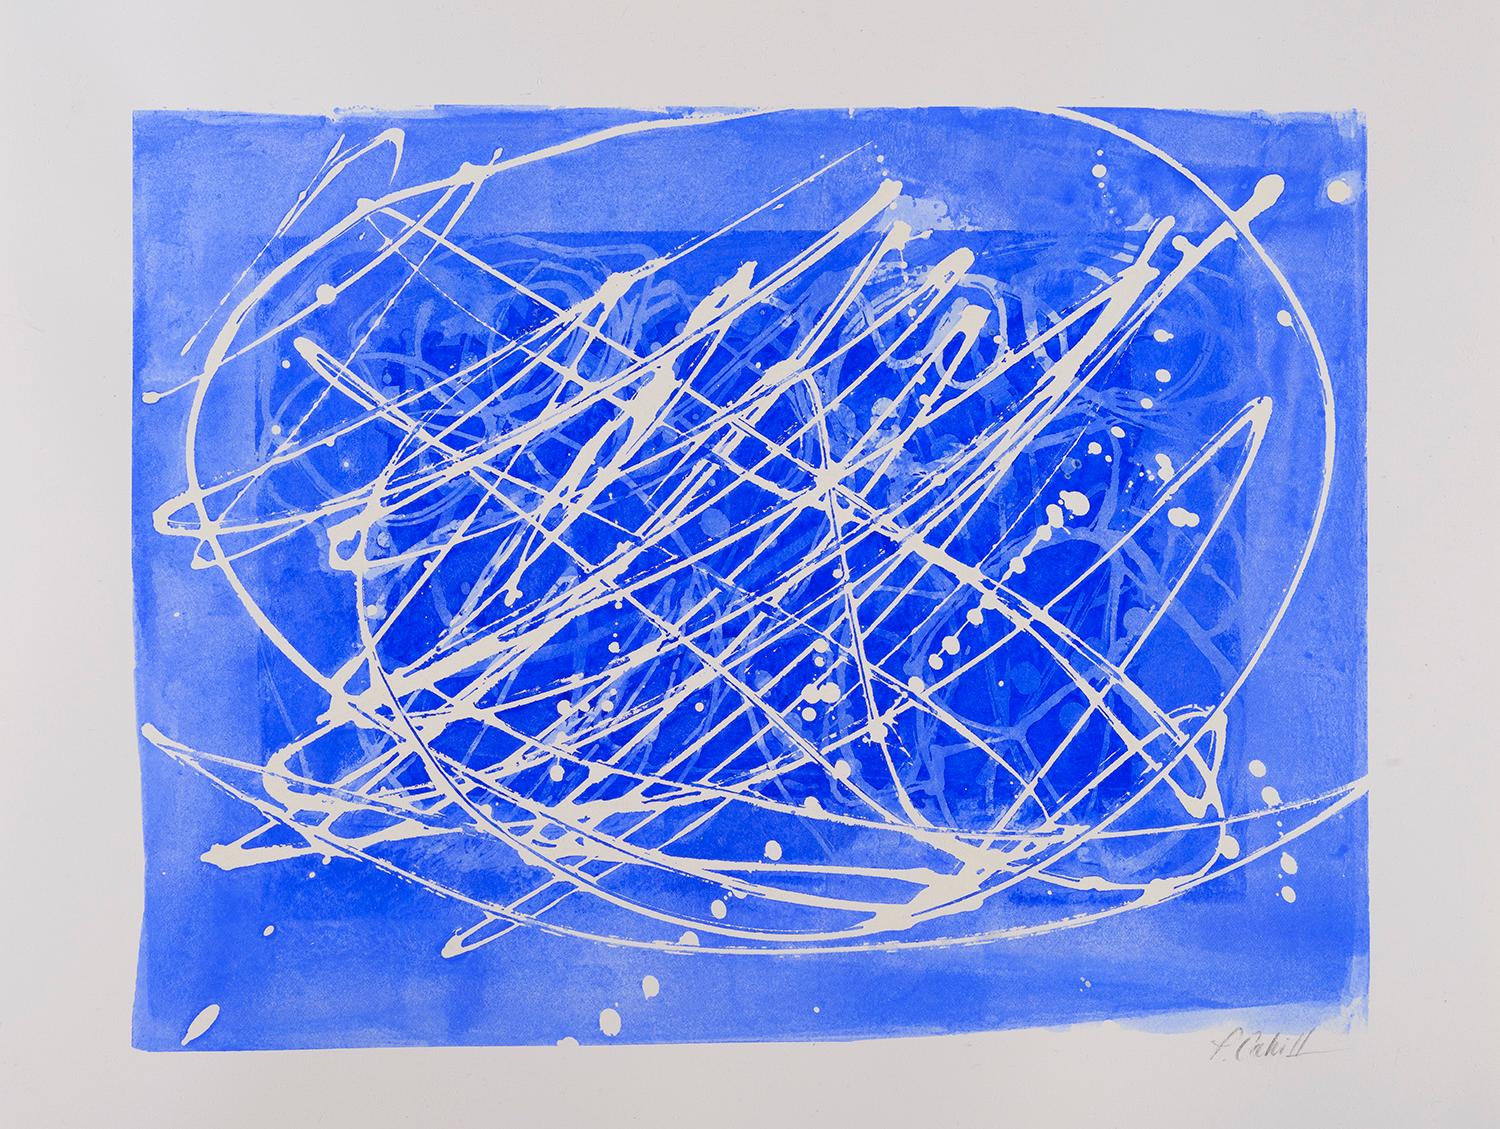 Gilded: abstract expressionist blue & white painting/drawing on paper, framed For Sale 2